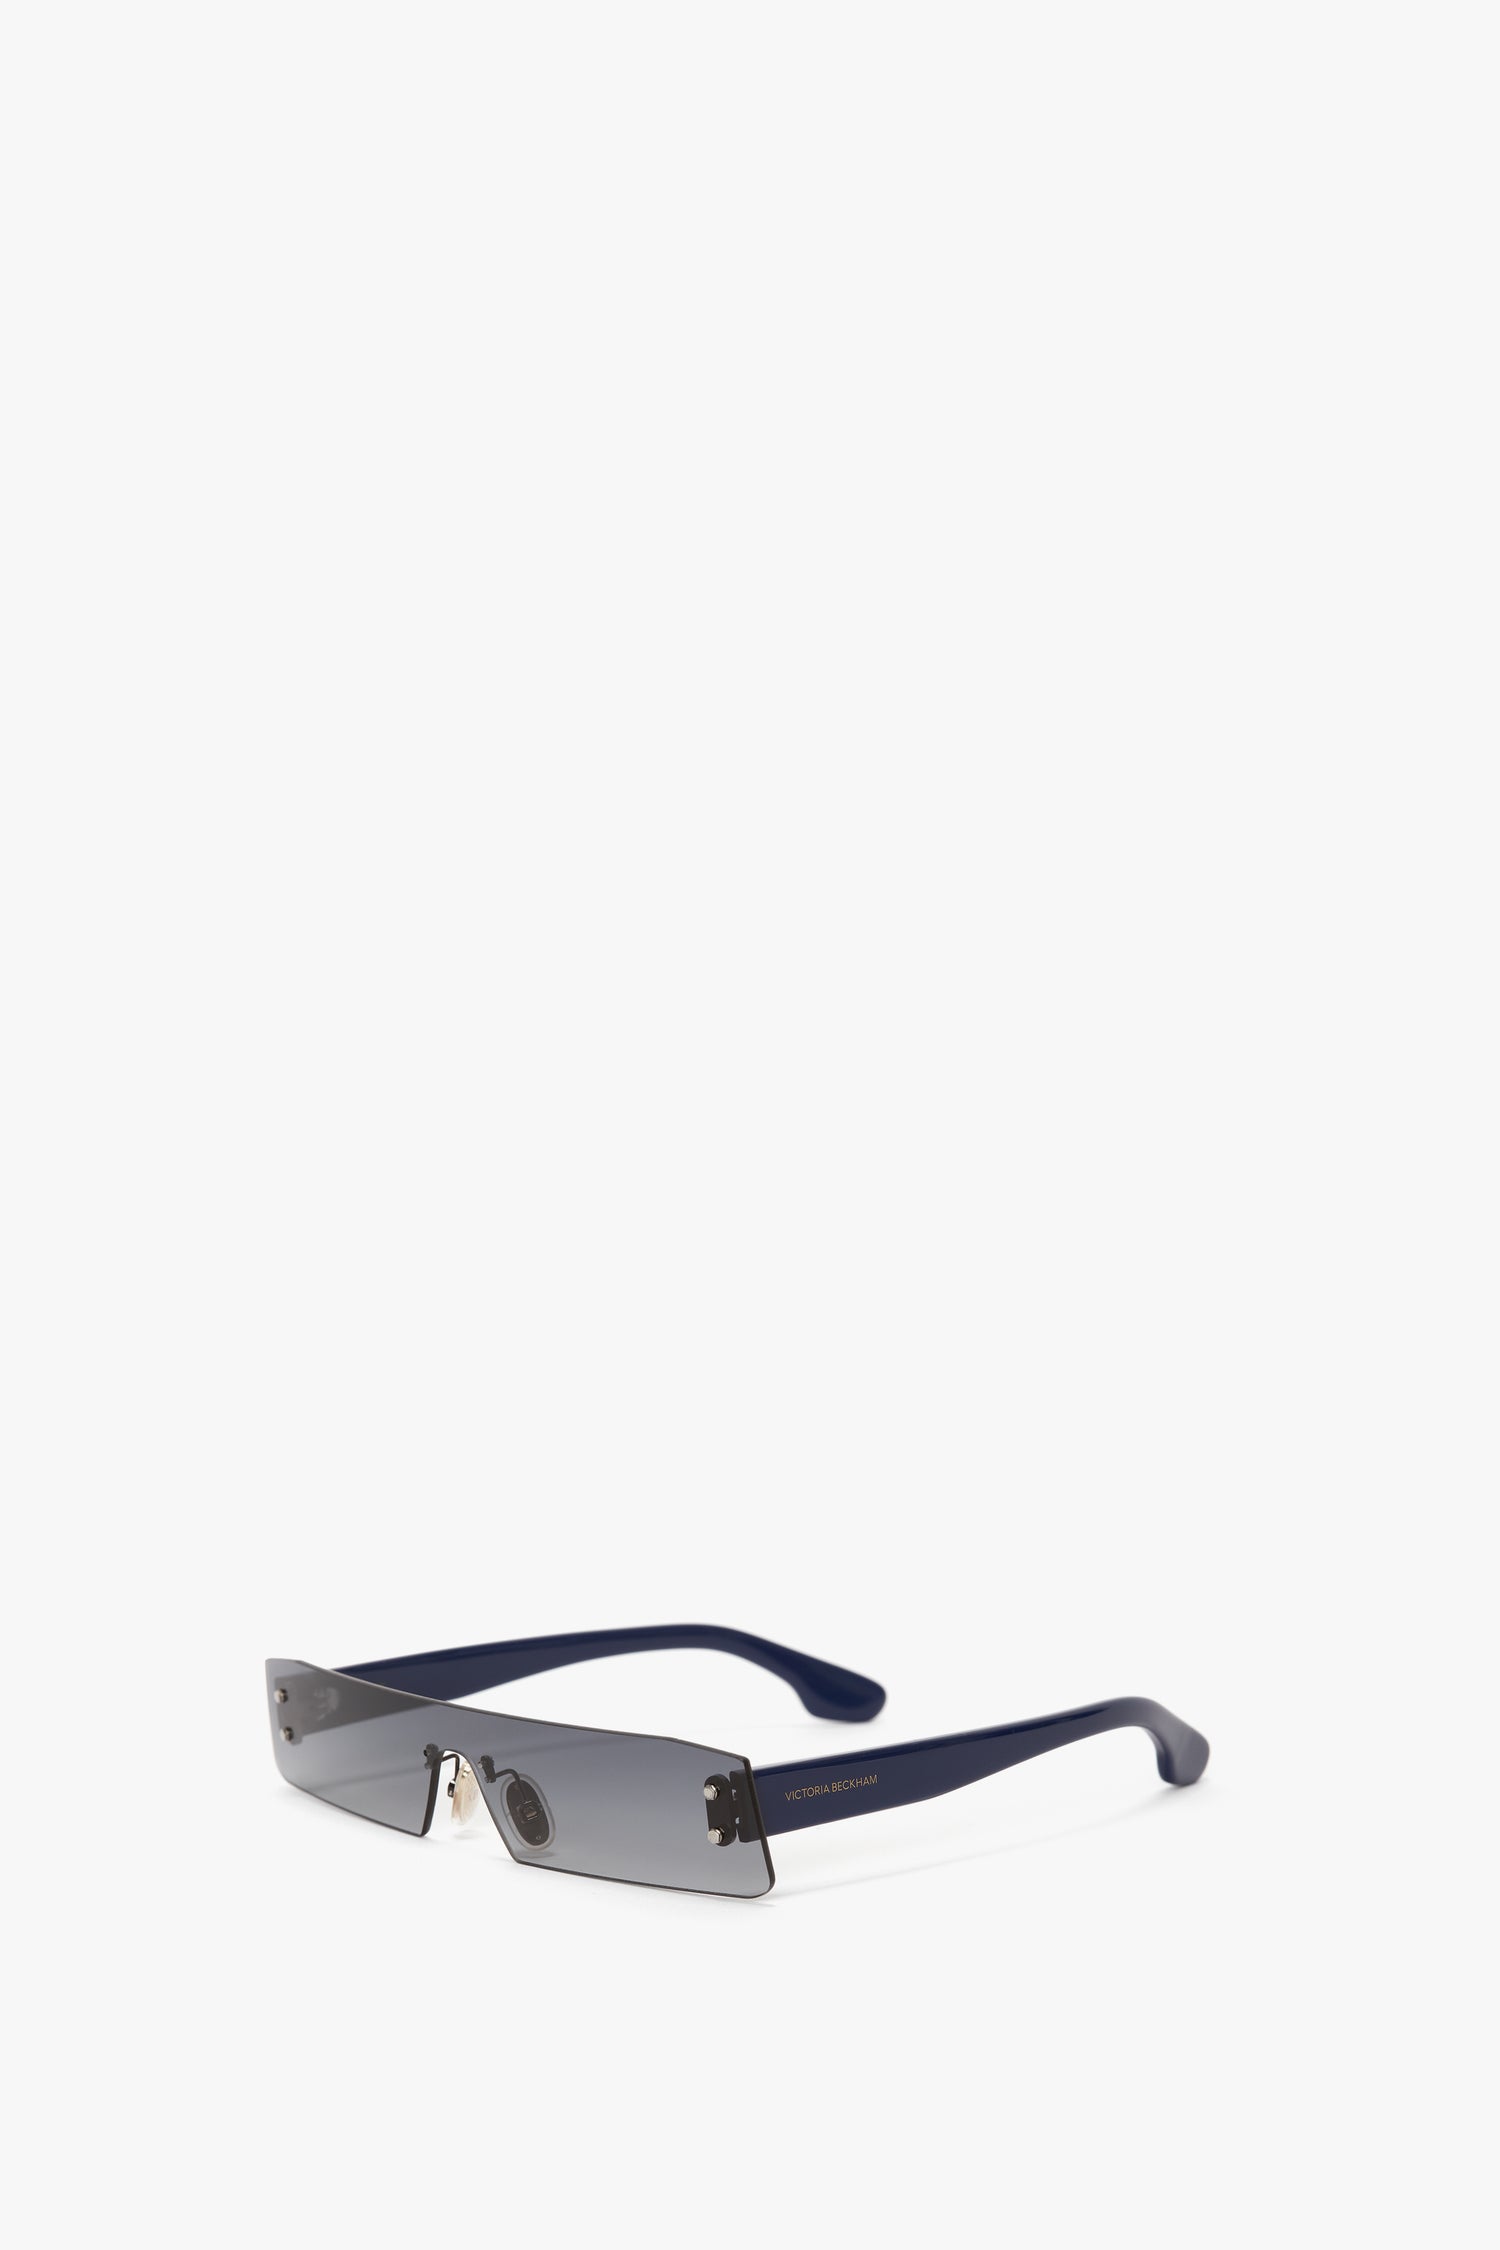 Mini Visor Sunglasses In Black-Green by Victoria Beckham, reminiscent of Victoria Beckham's SS23 collection, rest stylishly on a white surface.